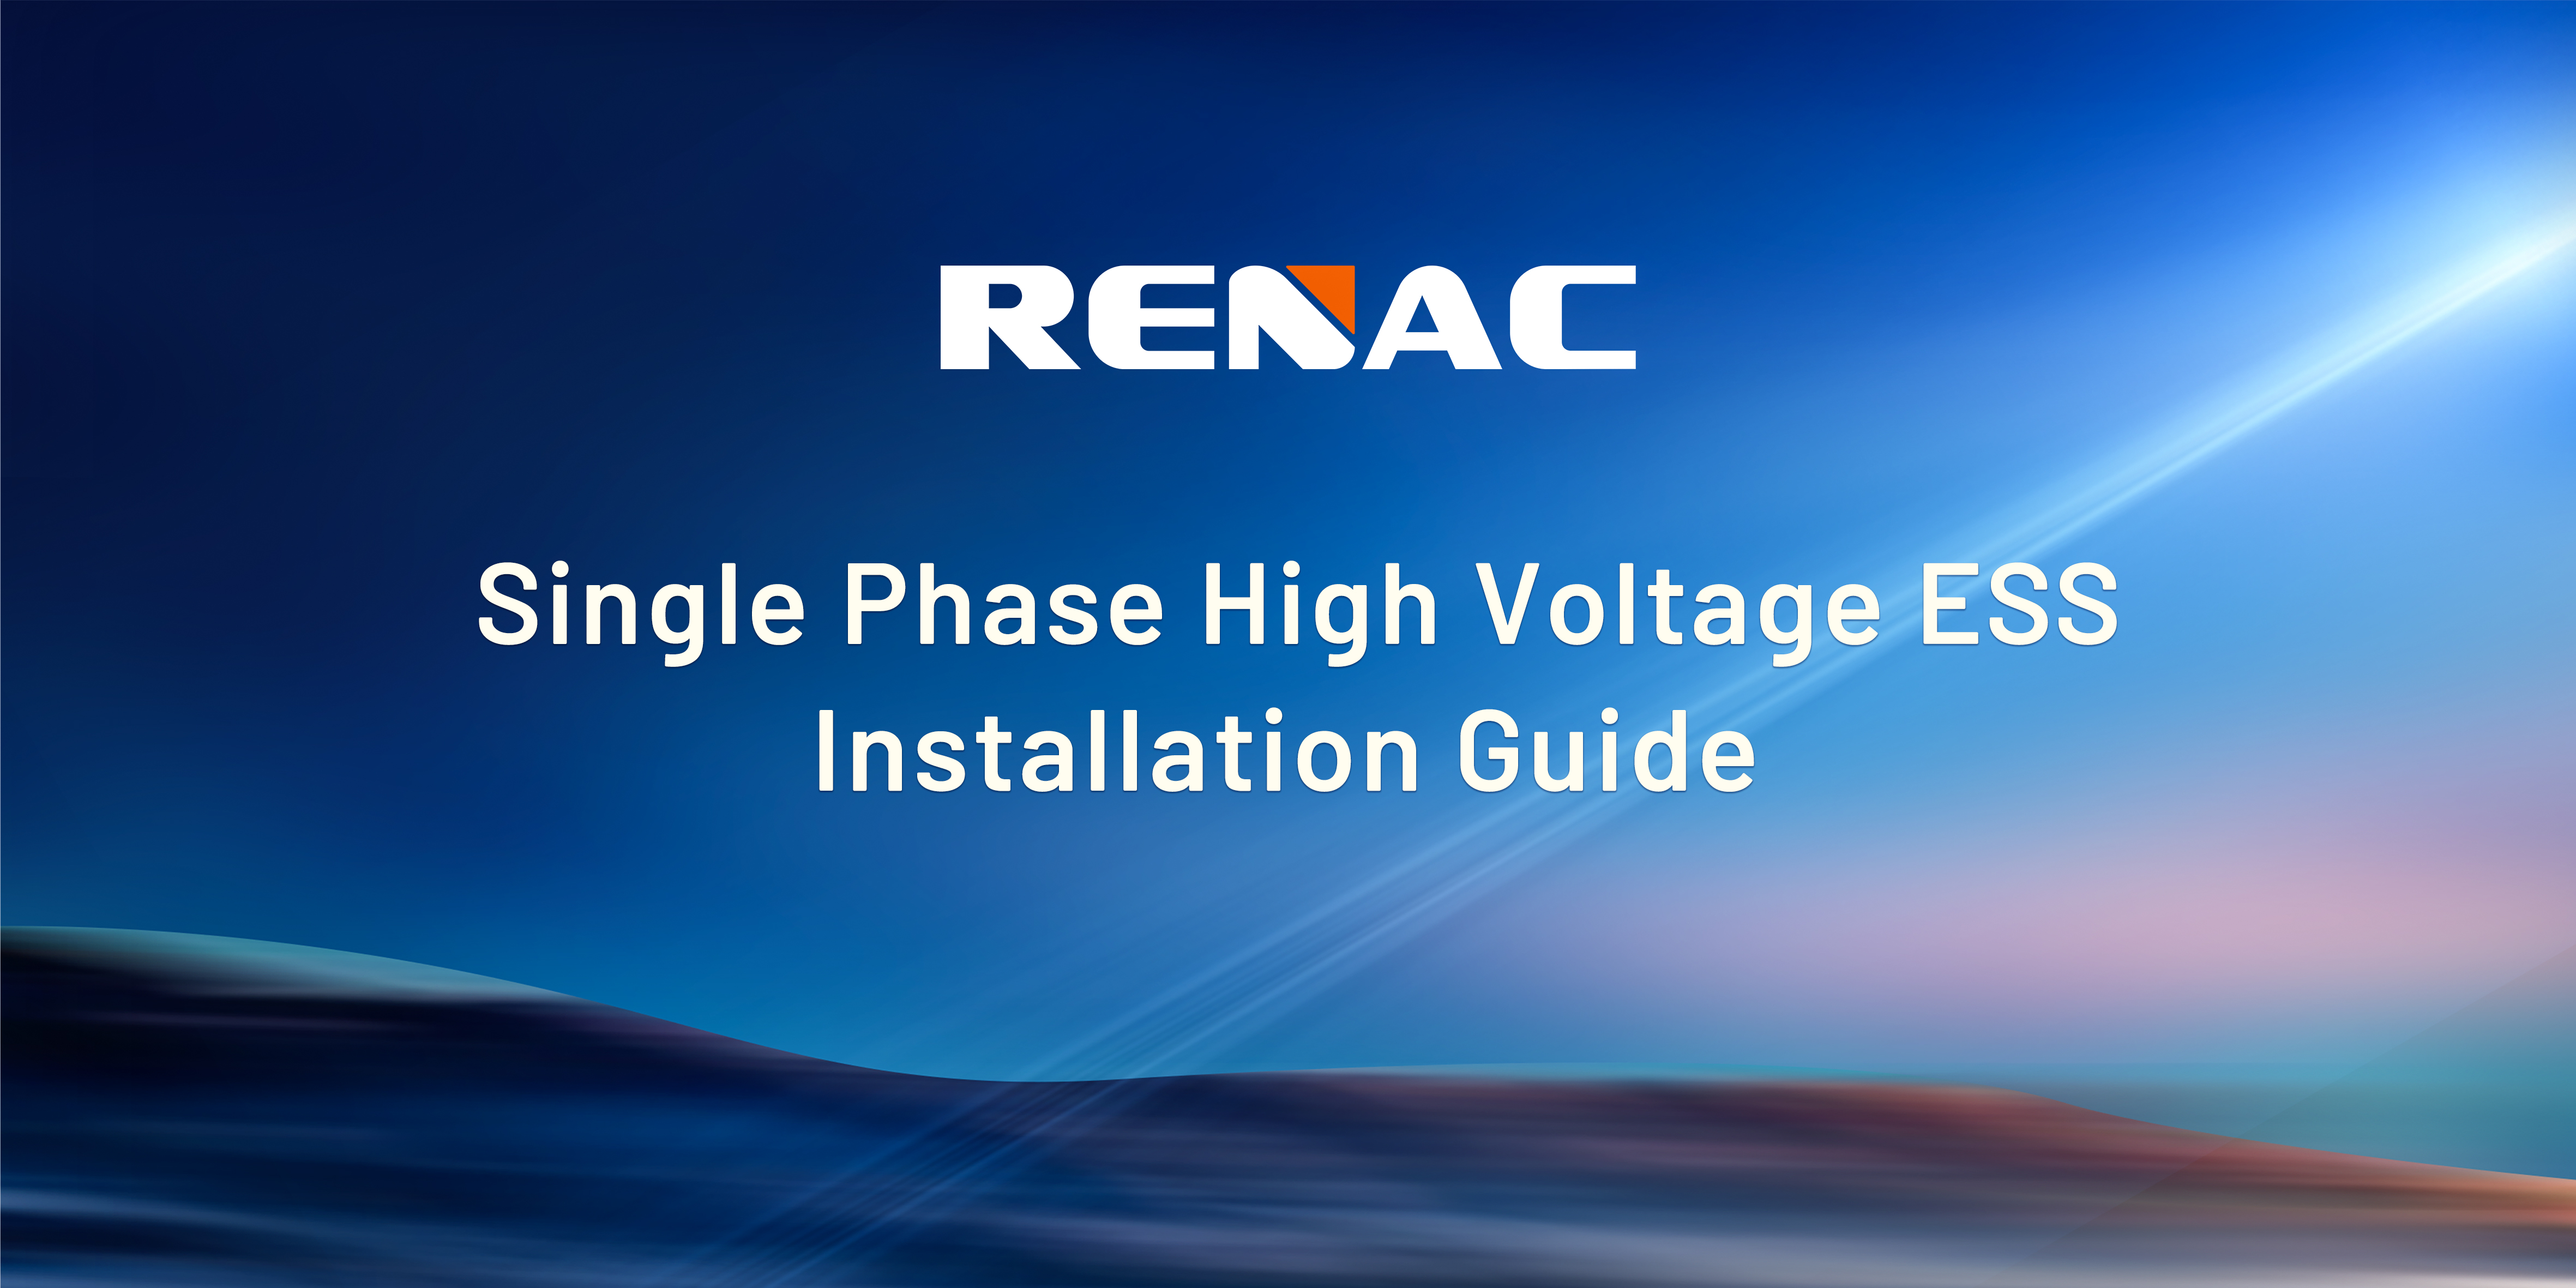 RENAC Single Phase High Voltage ESS Installation Guide